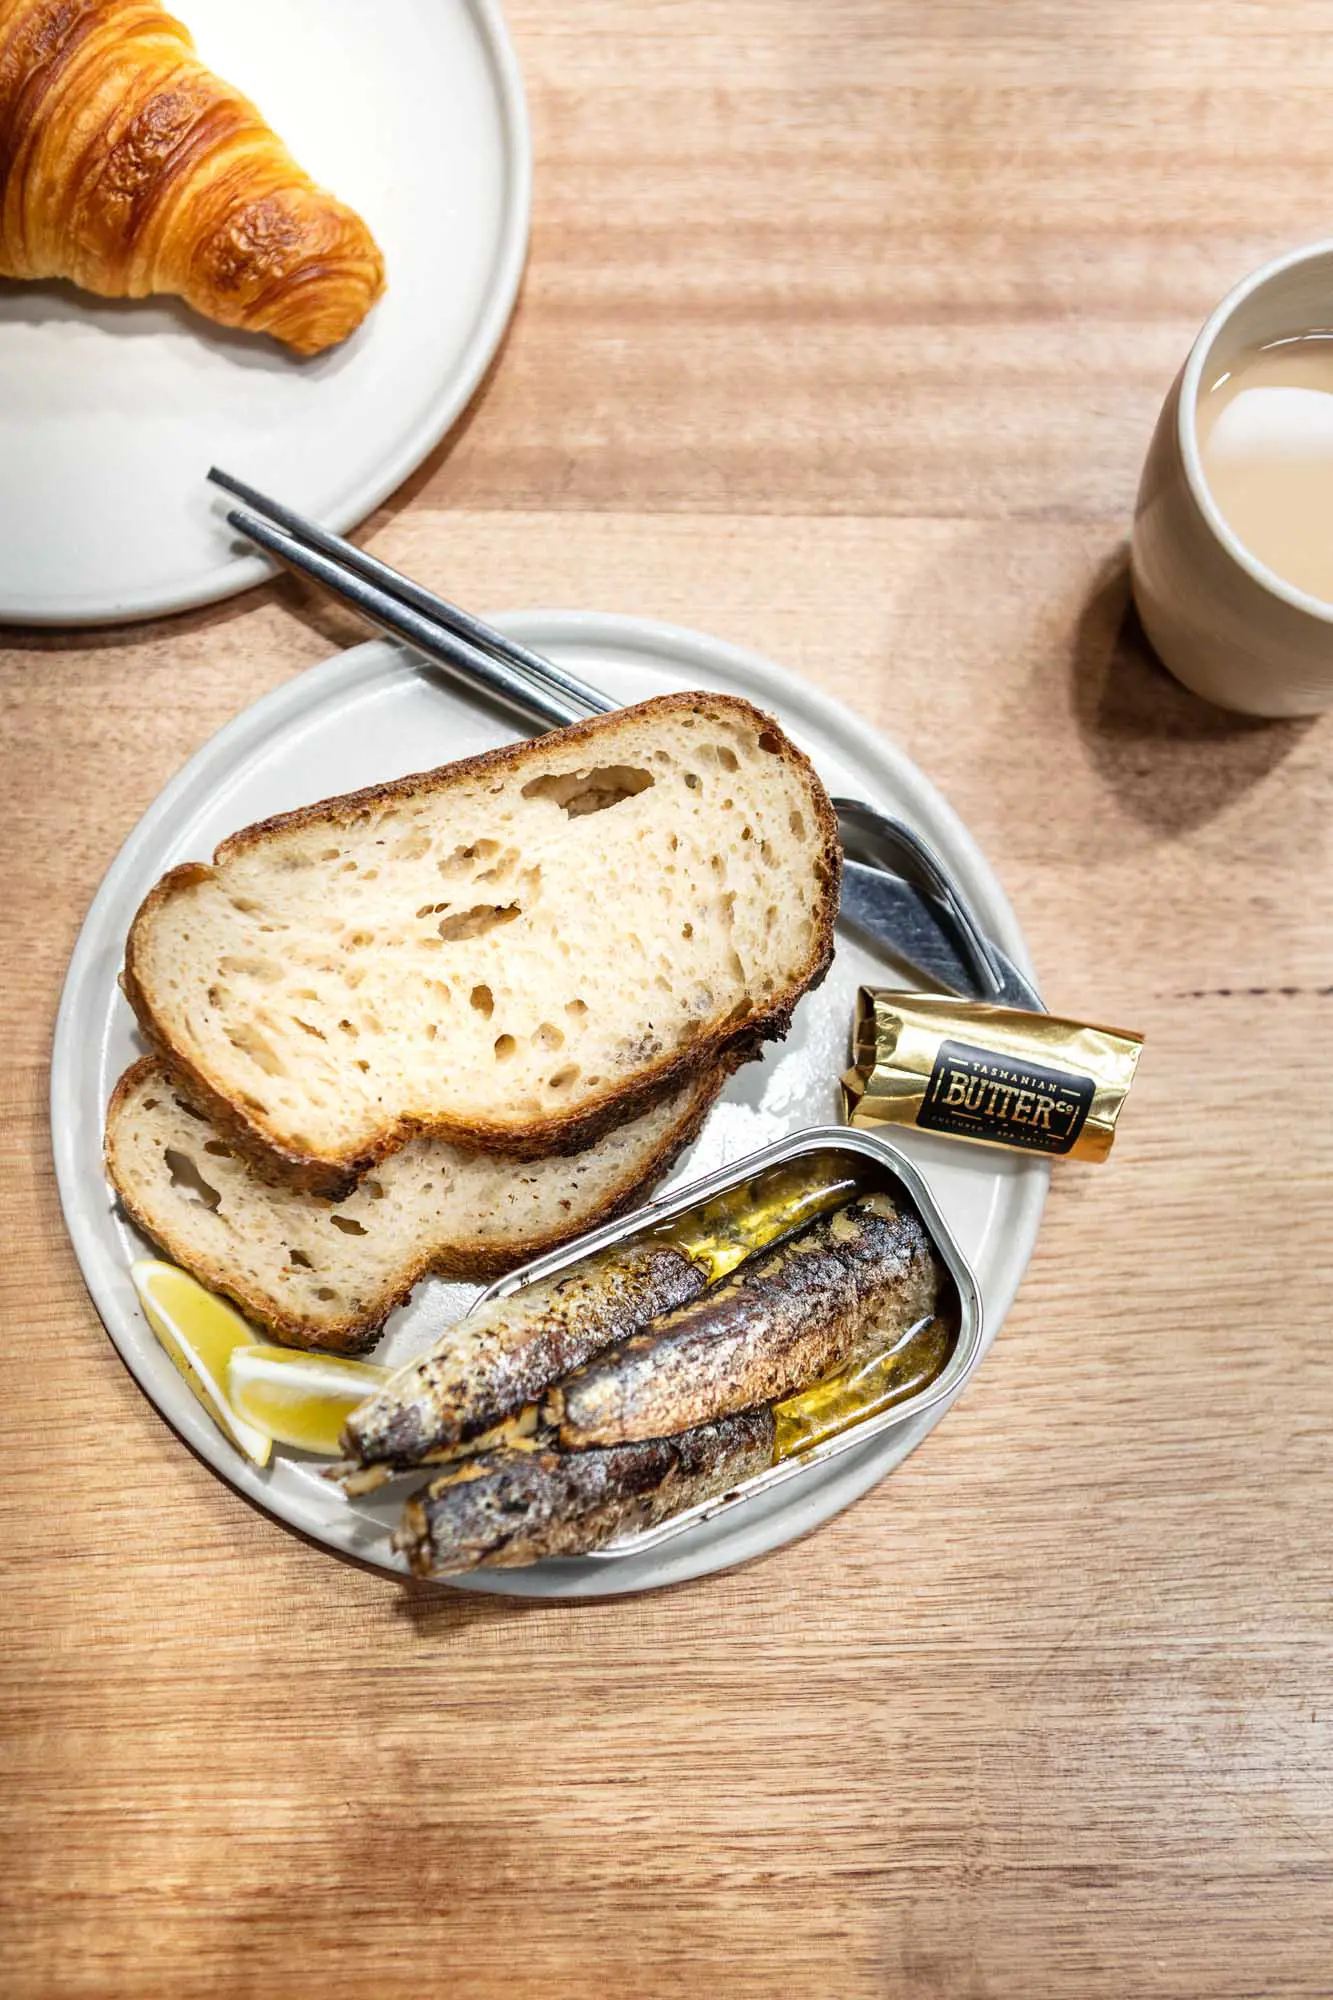 Bread and a tin of sardines with butter, placed on a white plate set on a wooden table.